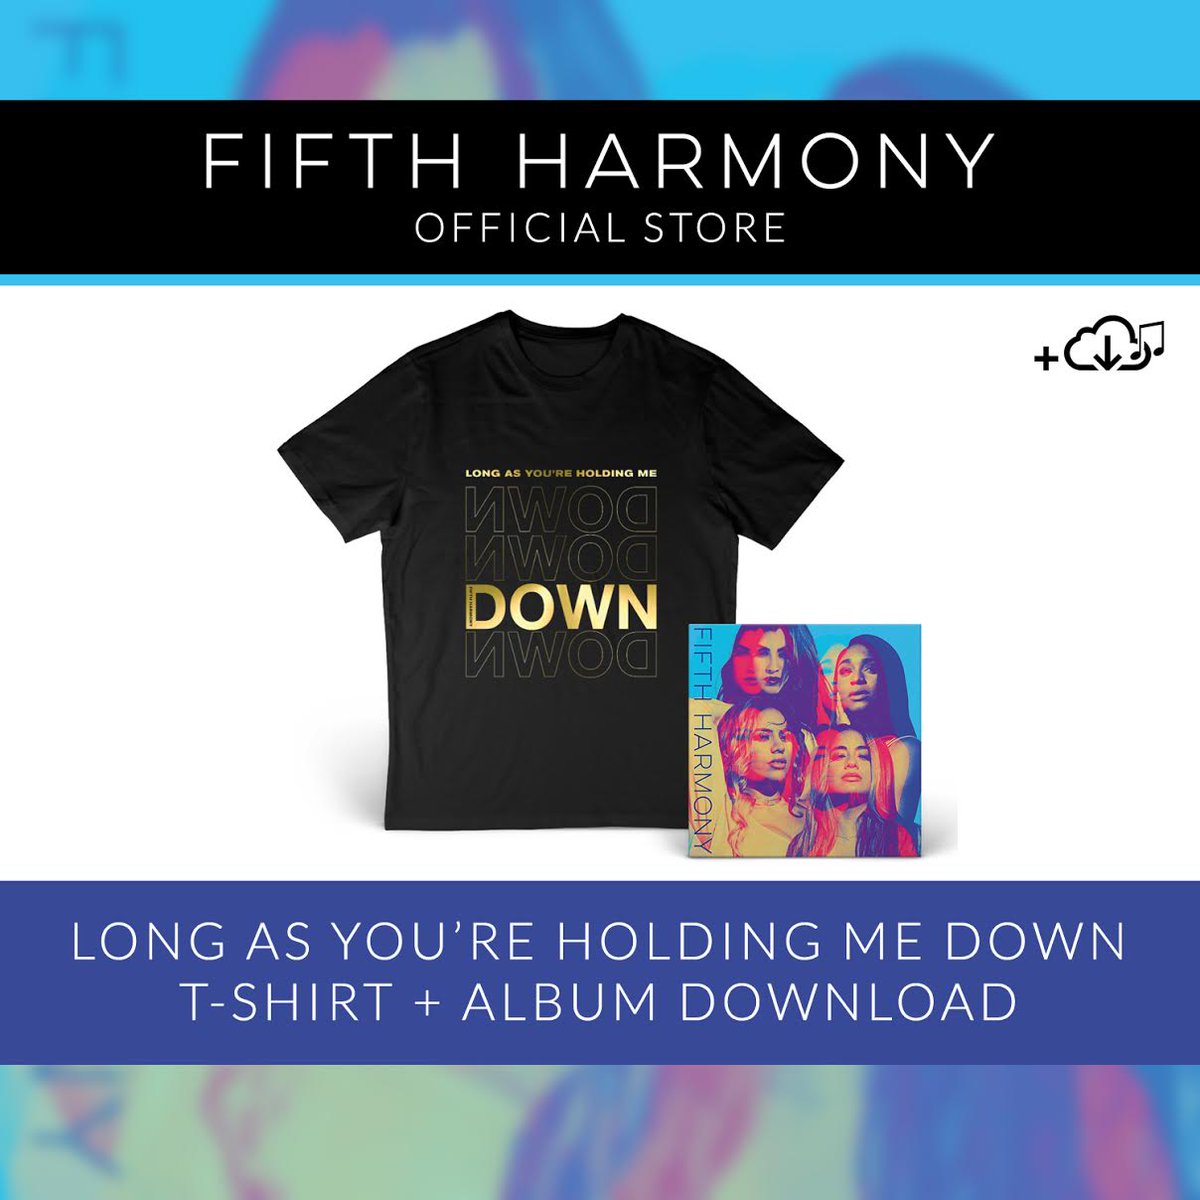 Cop some new merch by pre-ordering #FifthHarmony at fifthharmony.co/D2Cstore ✨ Let us know which album bundle you choose!!